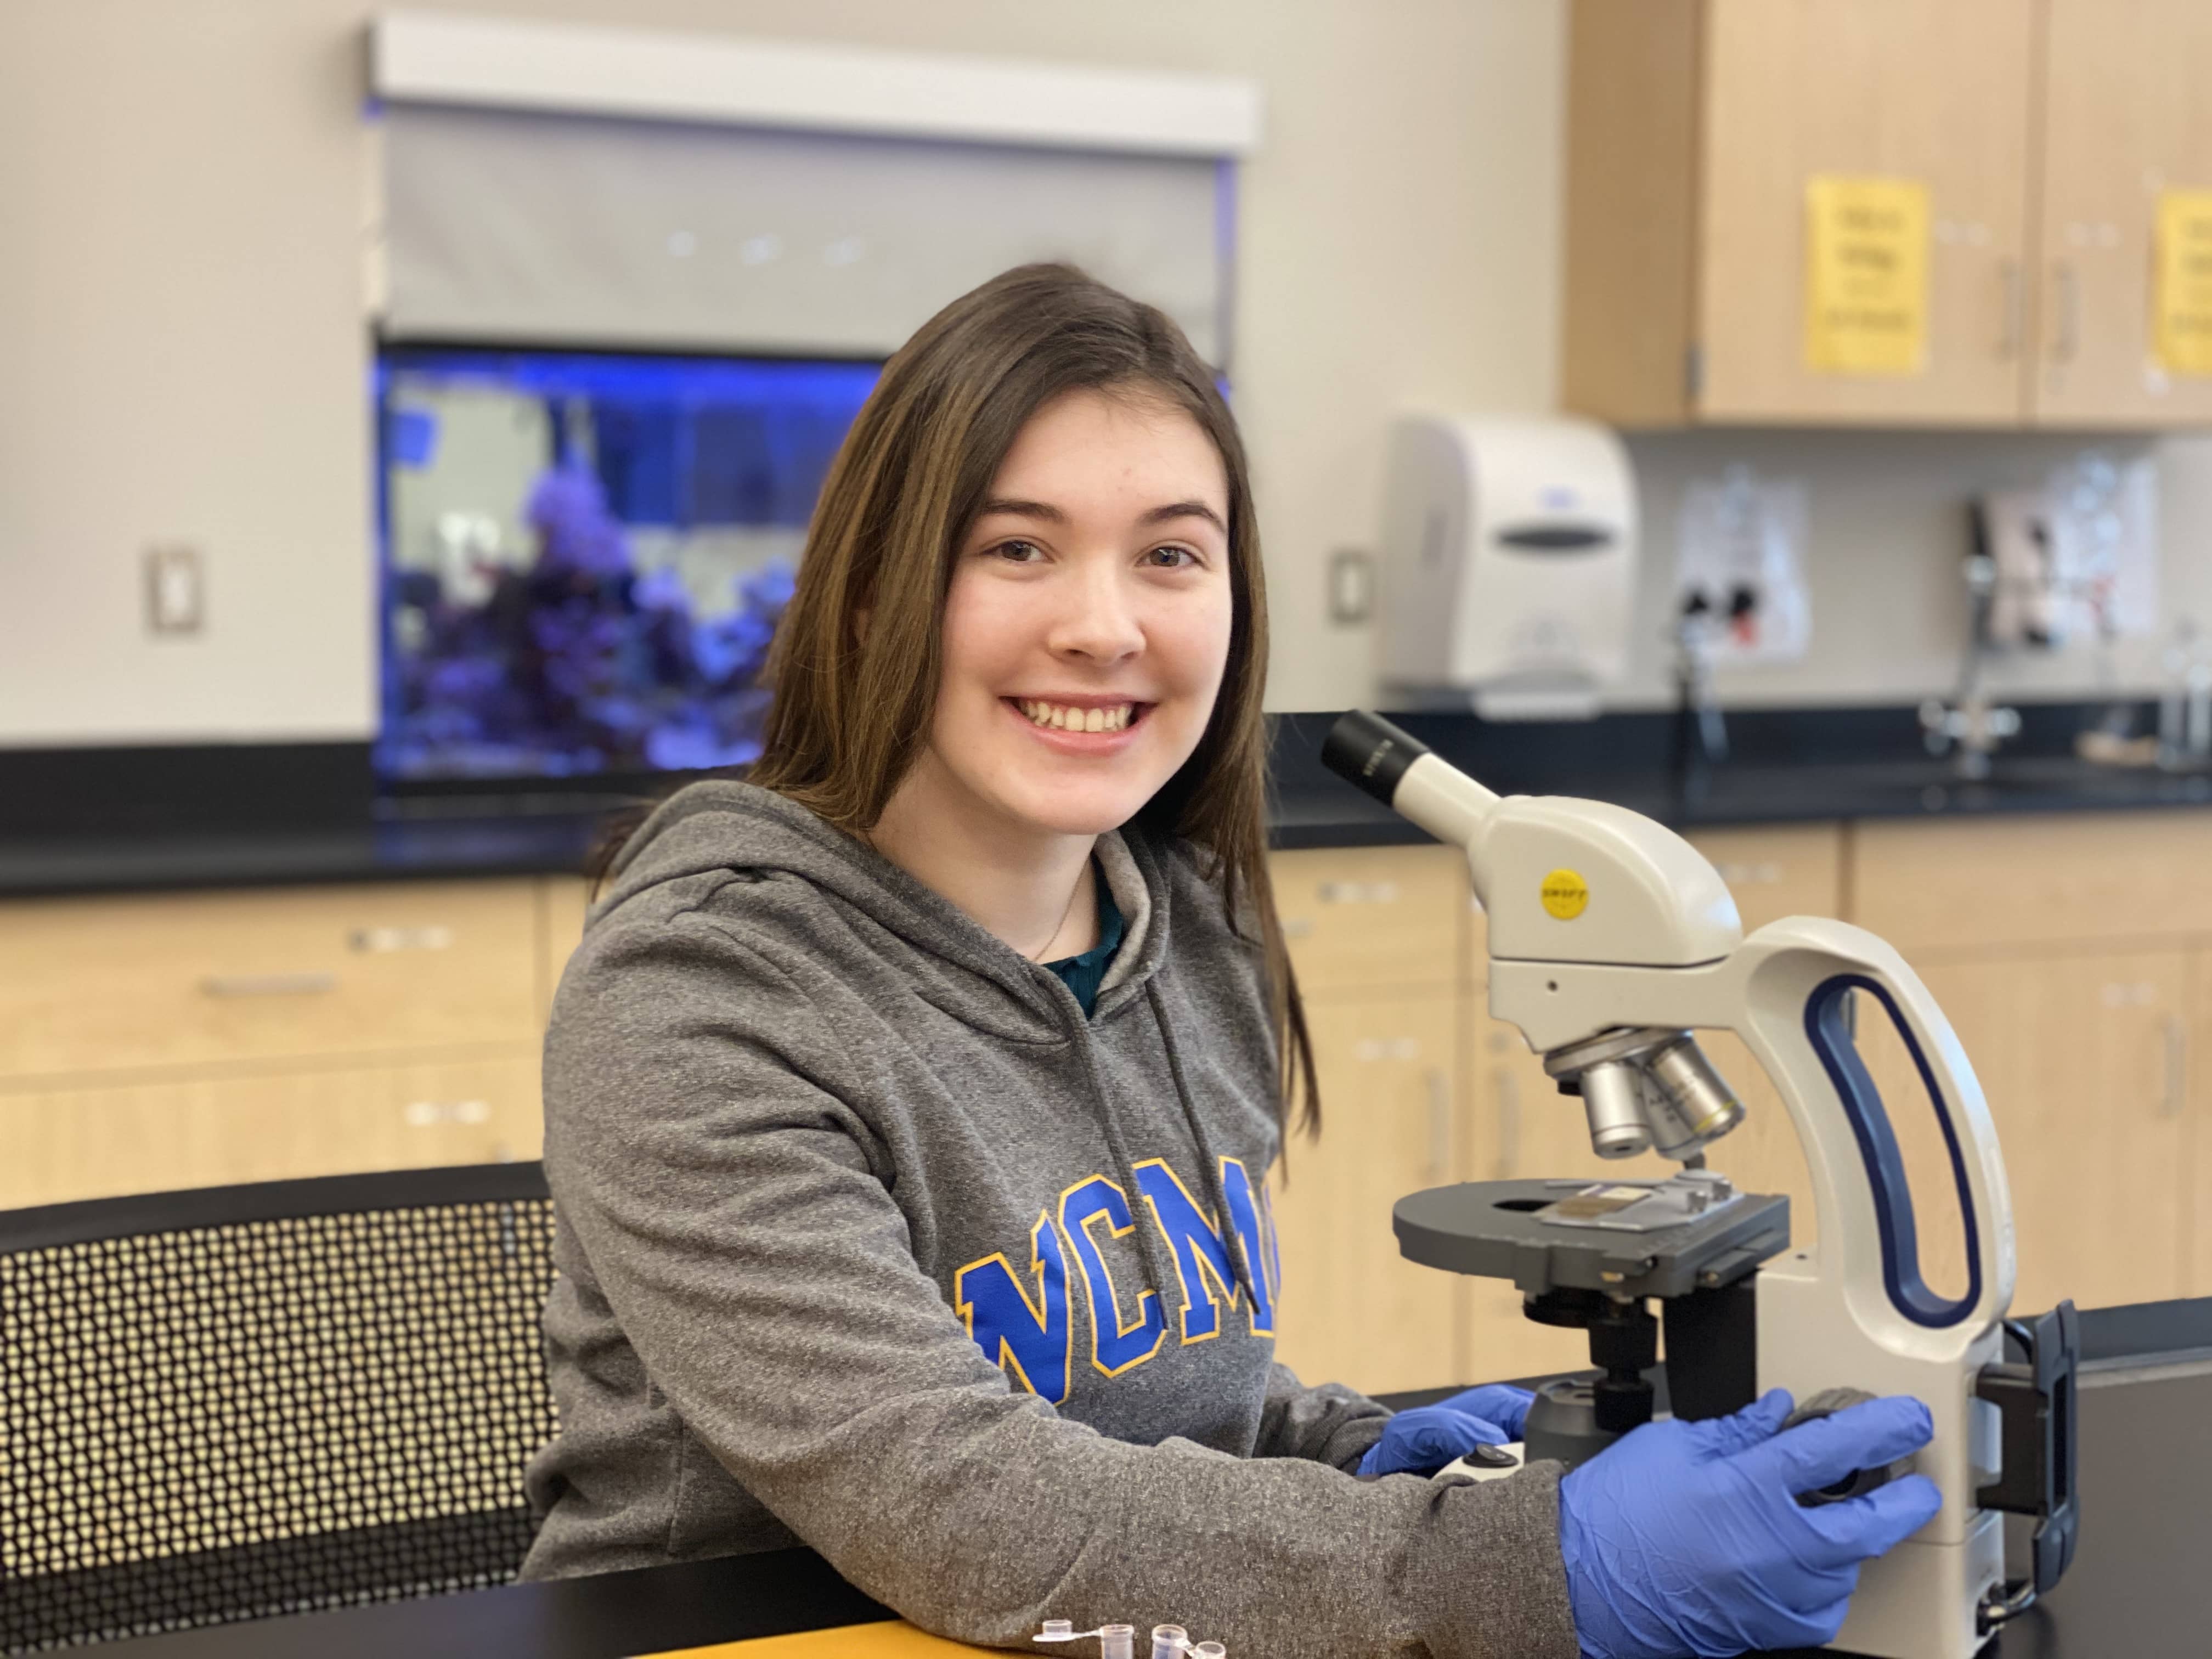 Female student at microscope, smiling